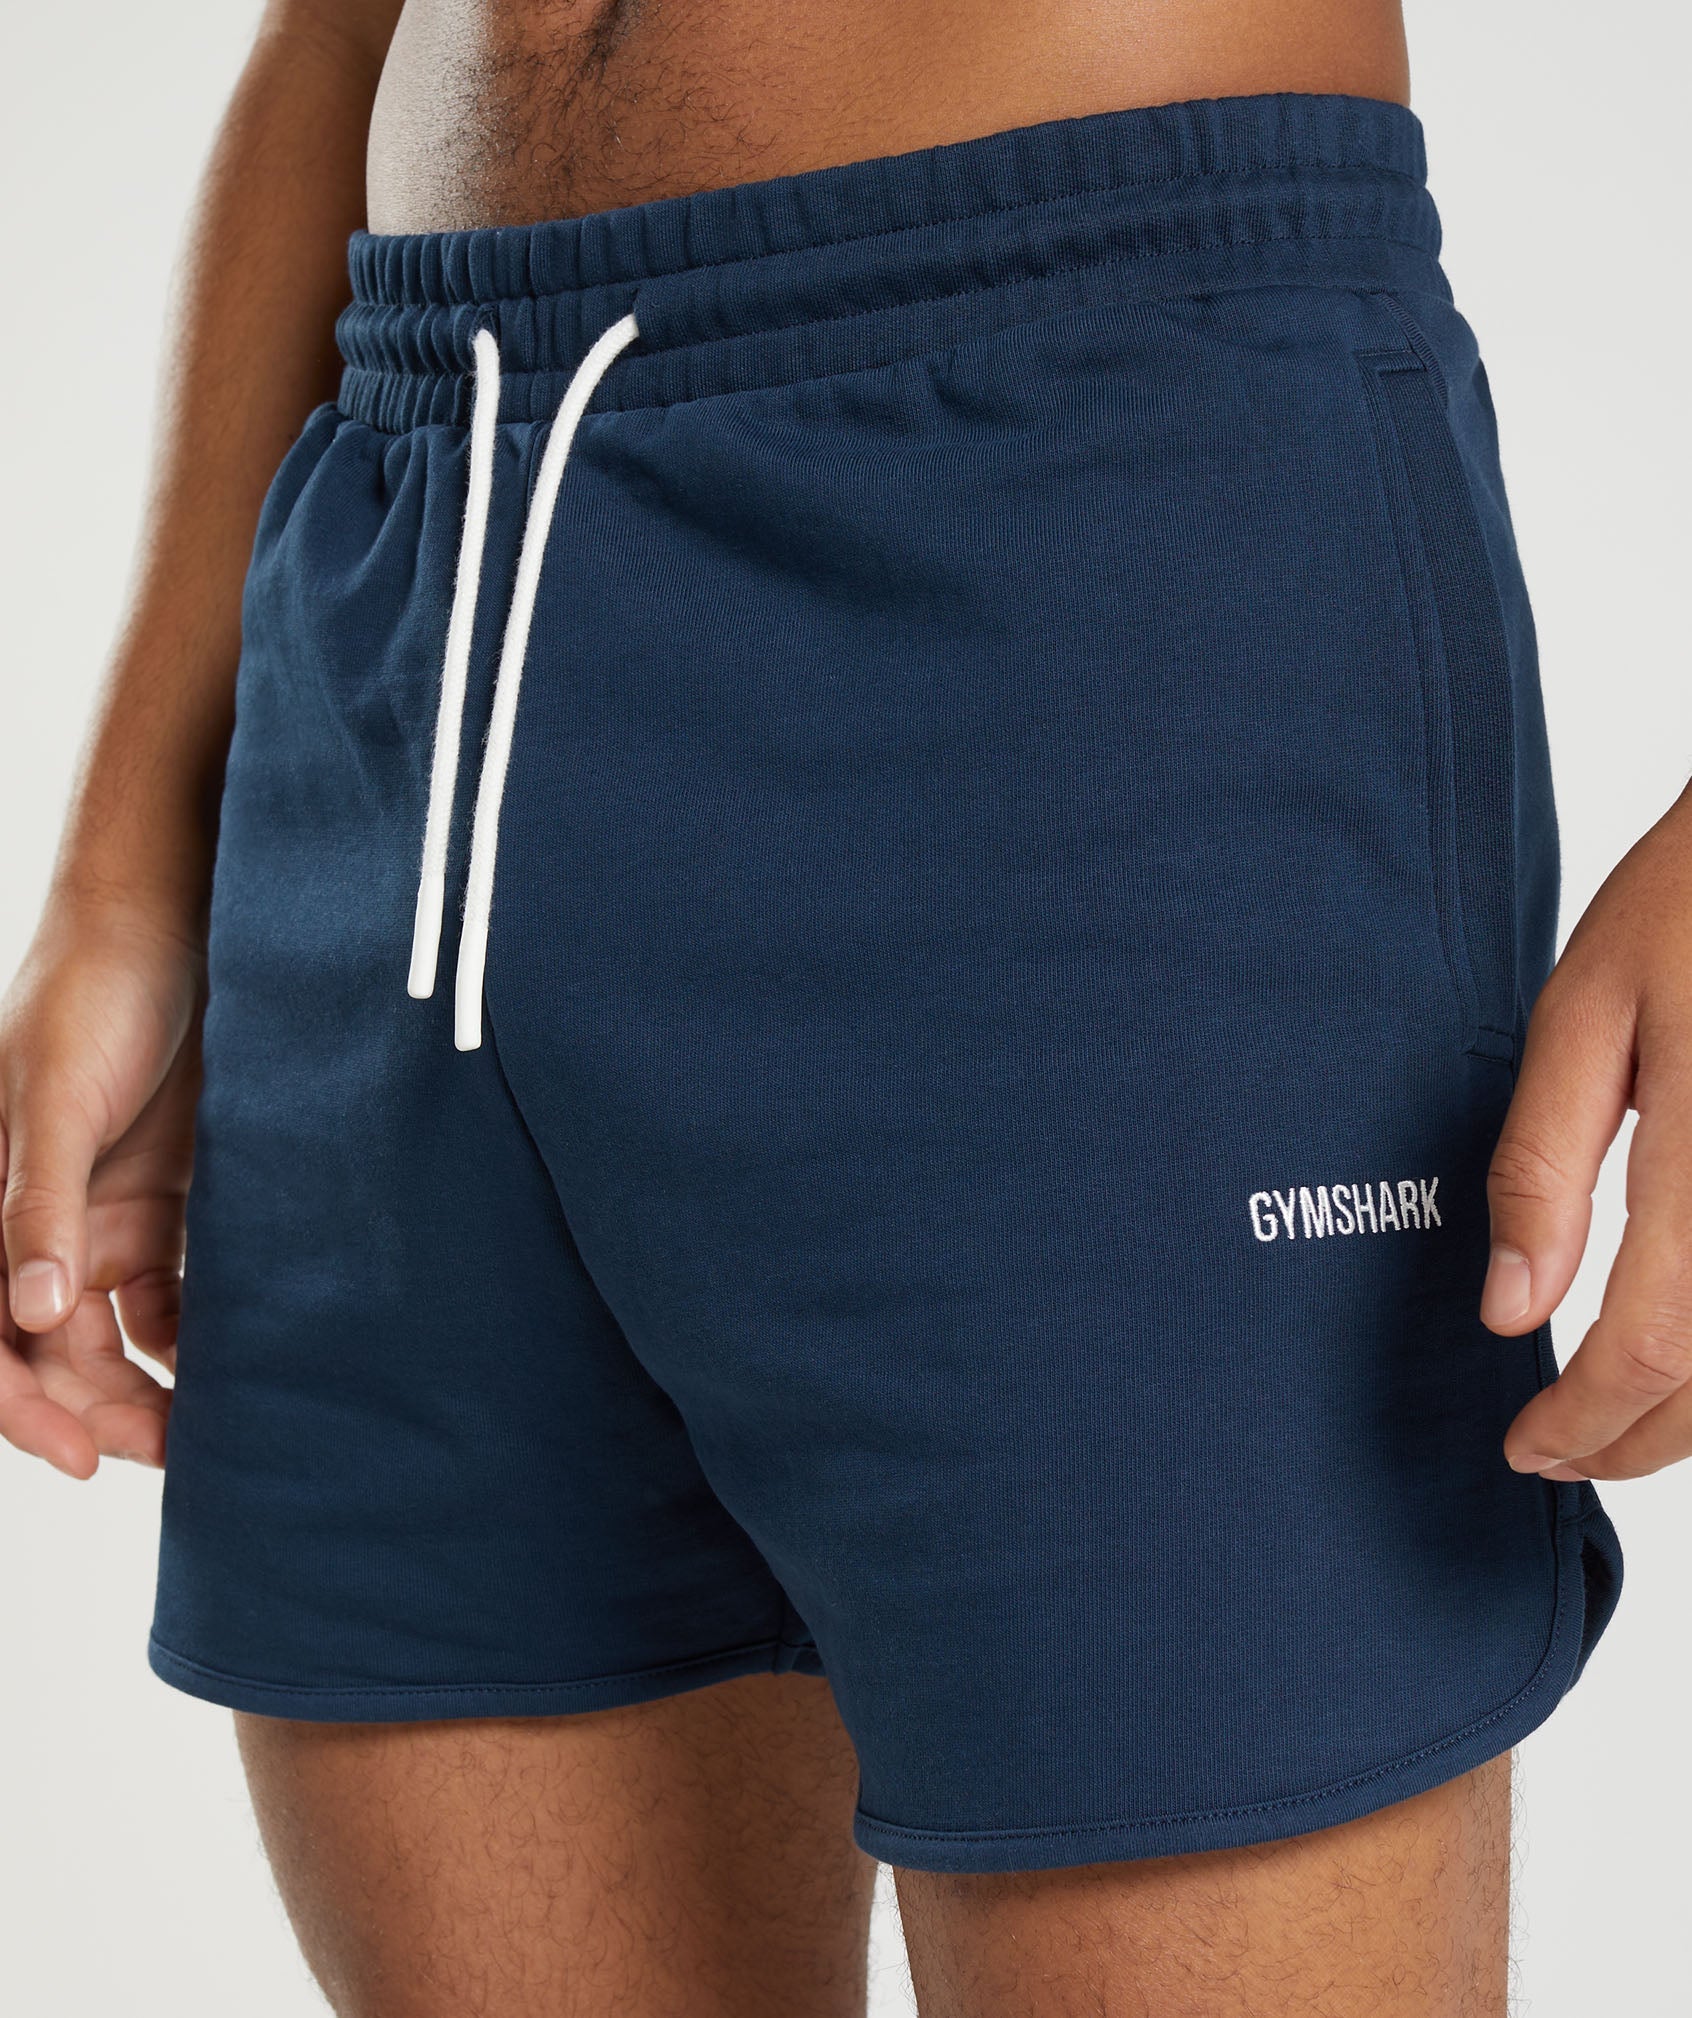 Rest Day Sweats 4'' Lounge Shorts in Navy - view 6